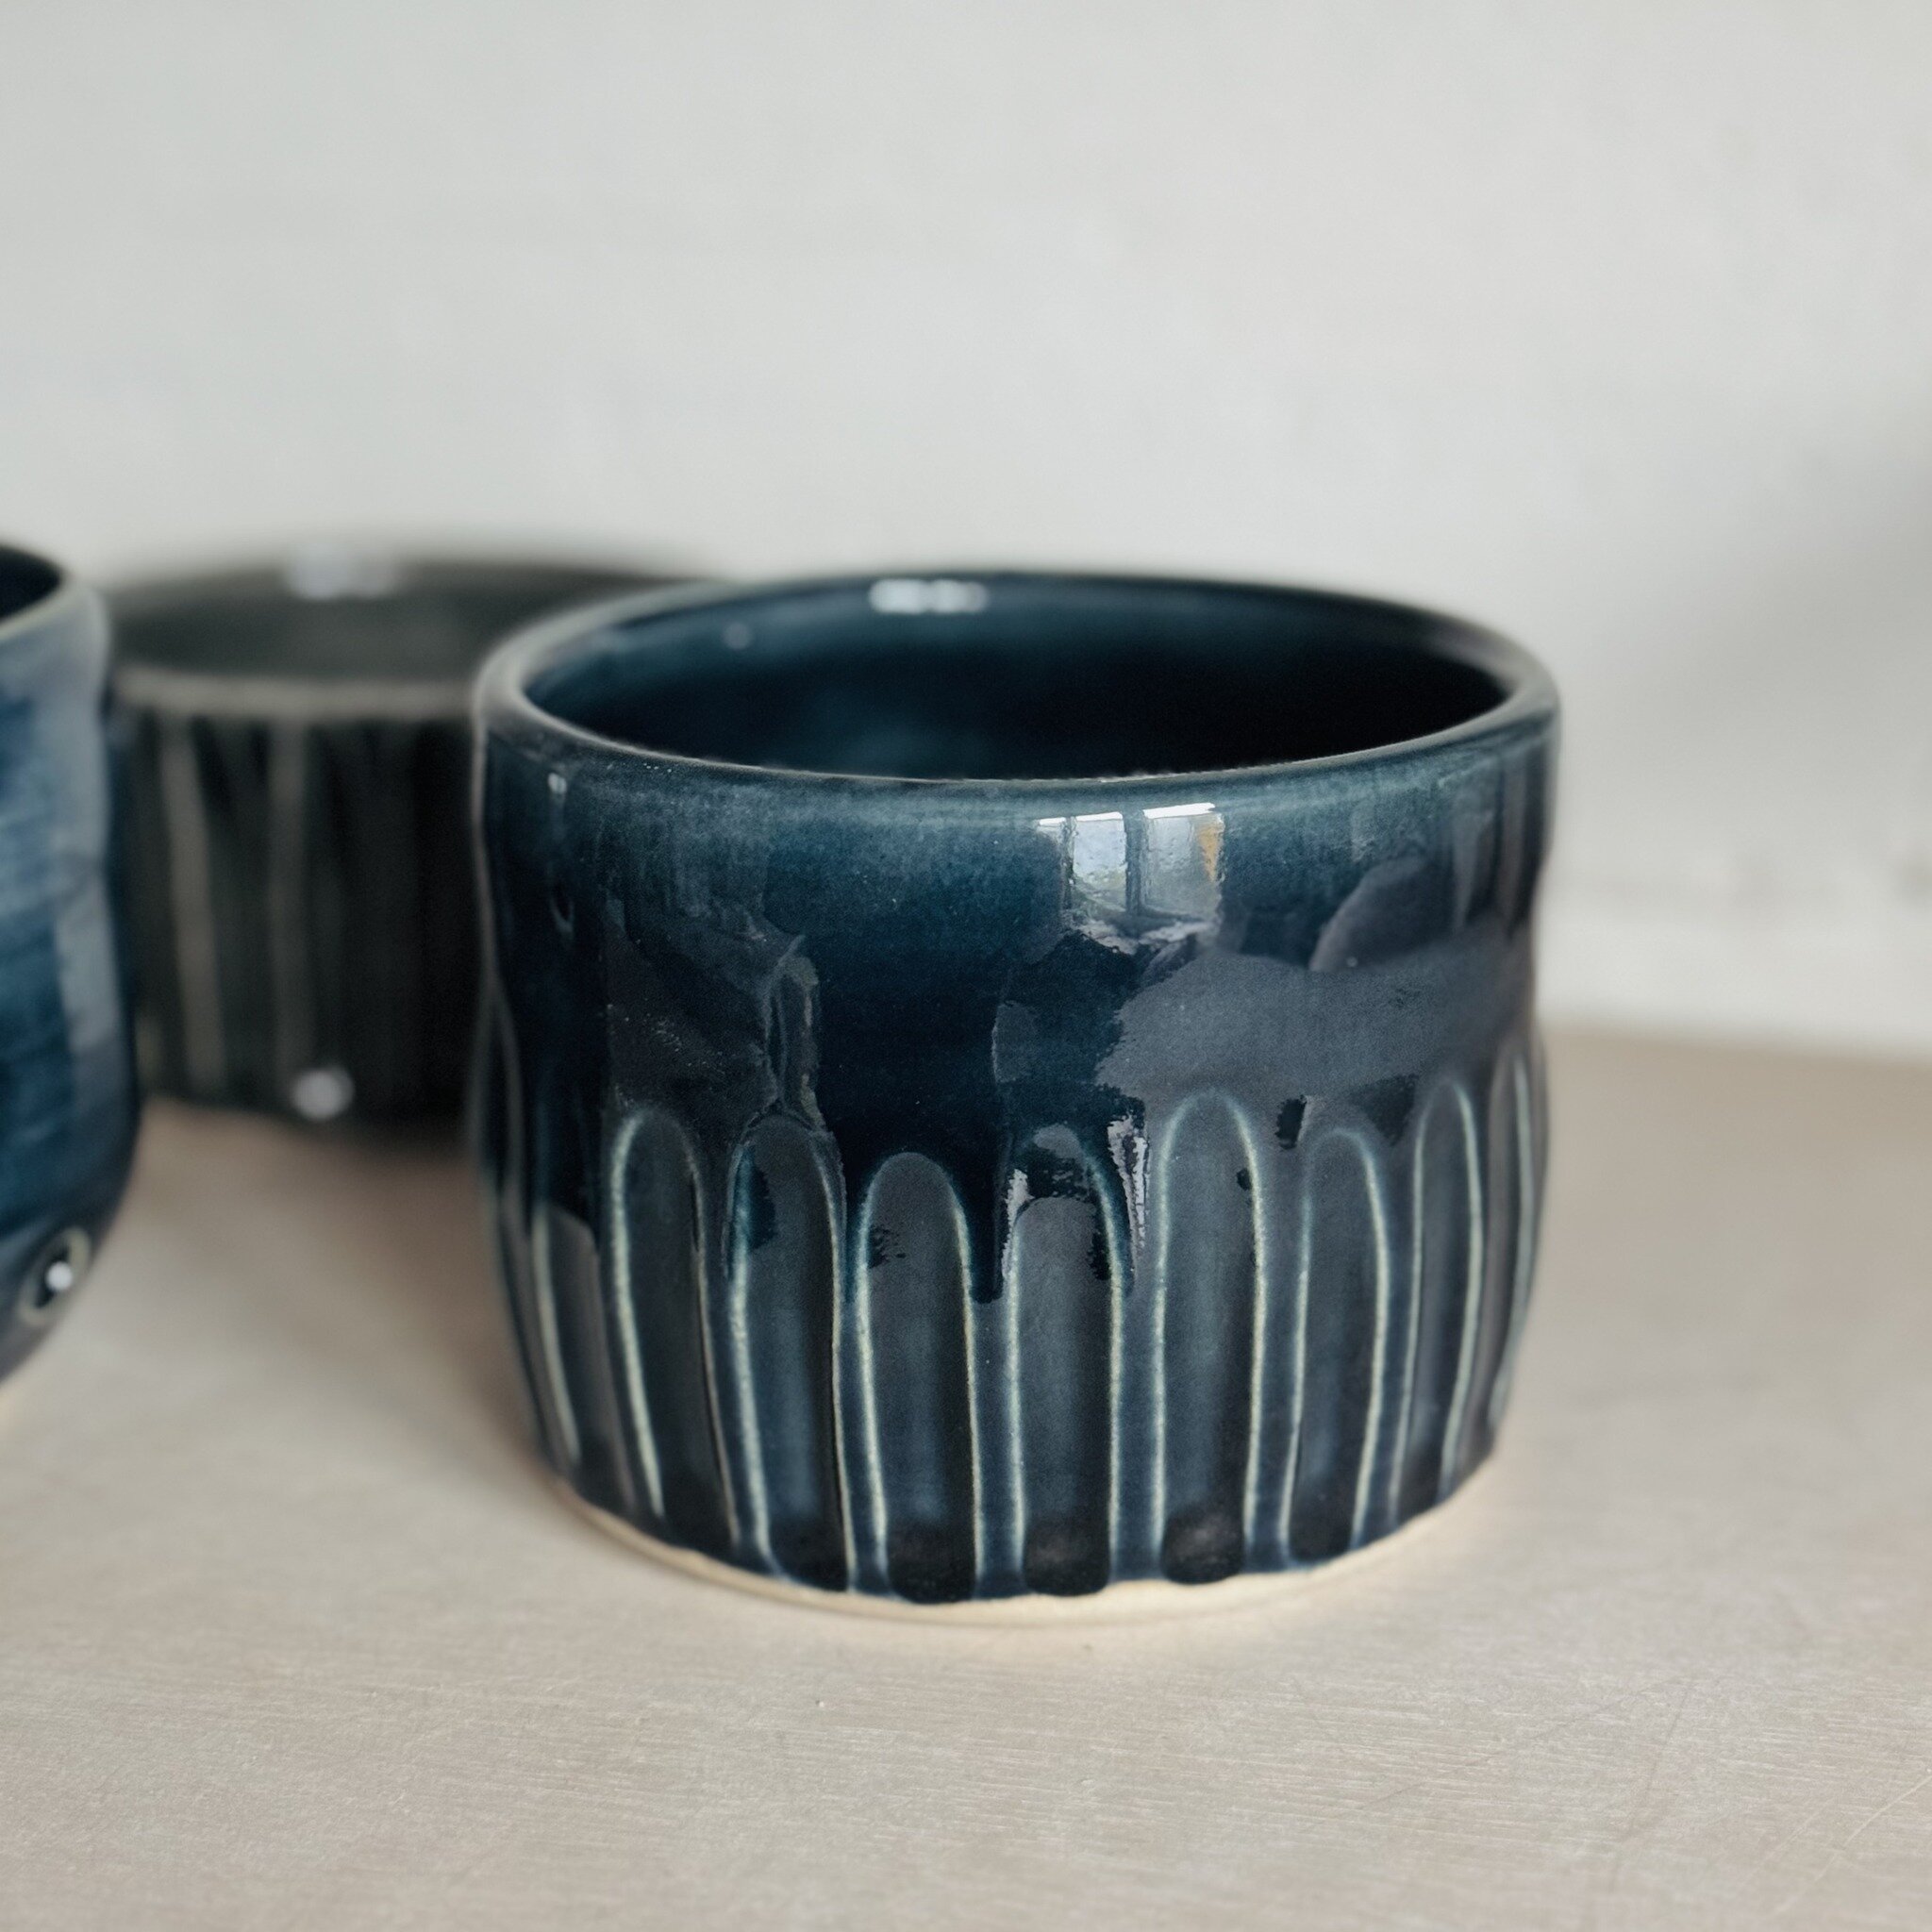 Take a peek at these charming pots, crafted by Kim. Each one thrown and carved with care, adds a touch of artisanal flair to any space.

#pottery #pots #handmadepots #ceramicpots #throwingwheel #carvingtecnique #pottery_lovers #potterylife #ceramics 